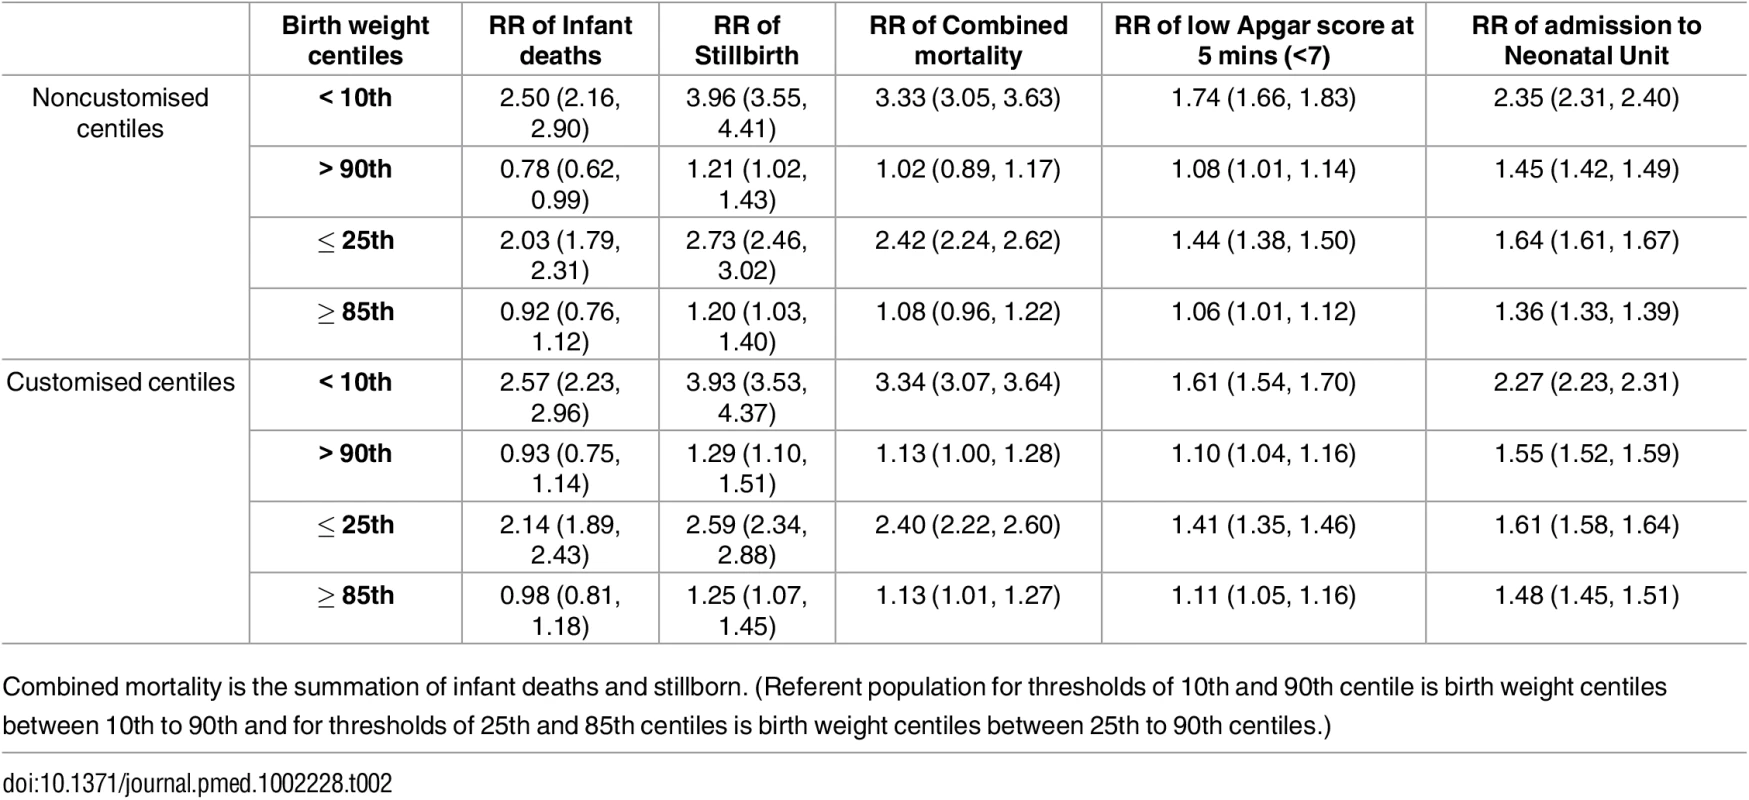 Relative risk (RR) with 95% confidence intervals of adverse outcomes for chosen and traditional birth weight centiles (noncustomised and customised) referent to the birth weight centiles included between the thresholds.